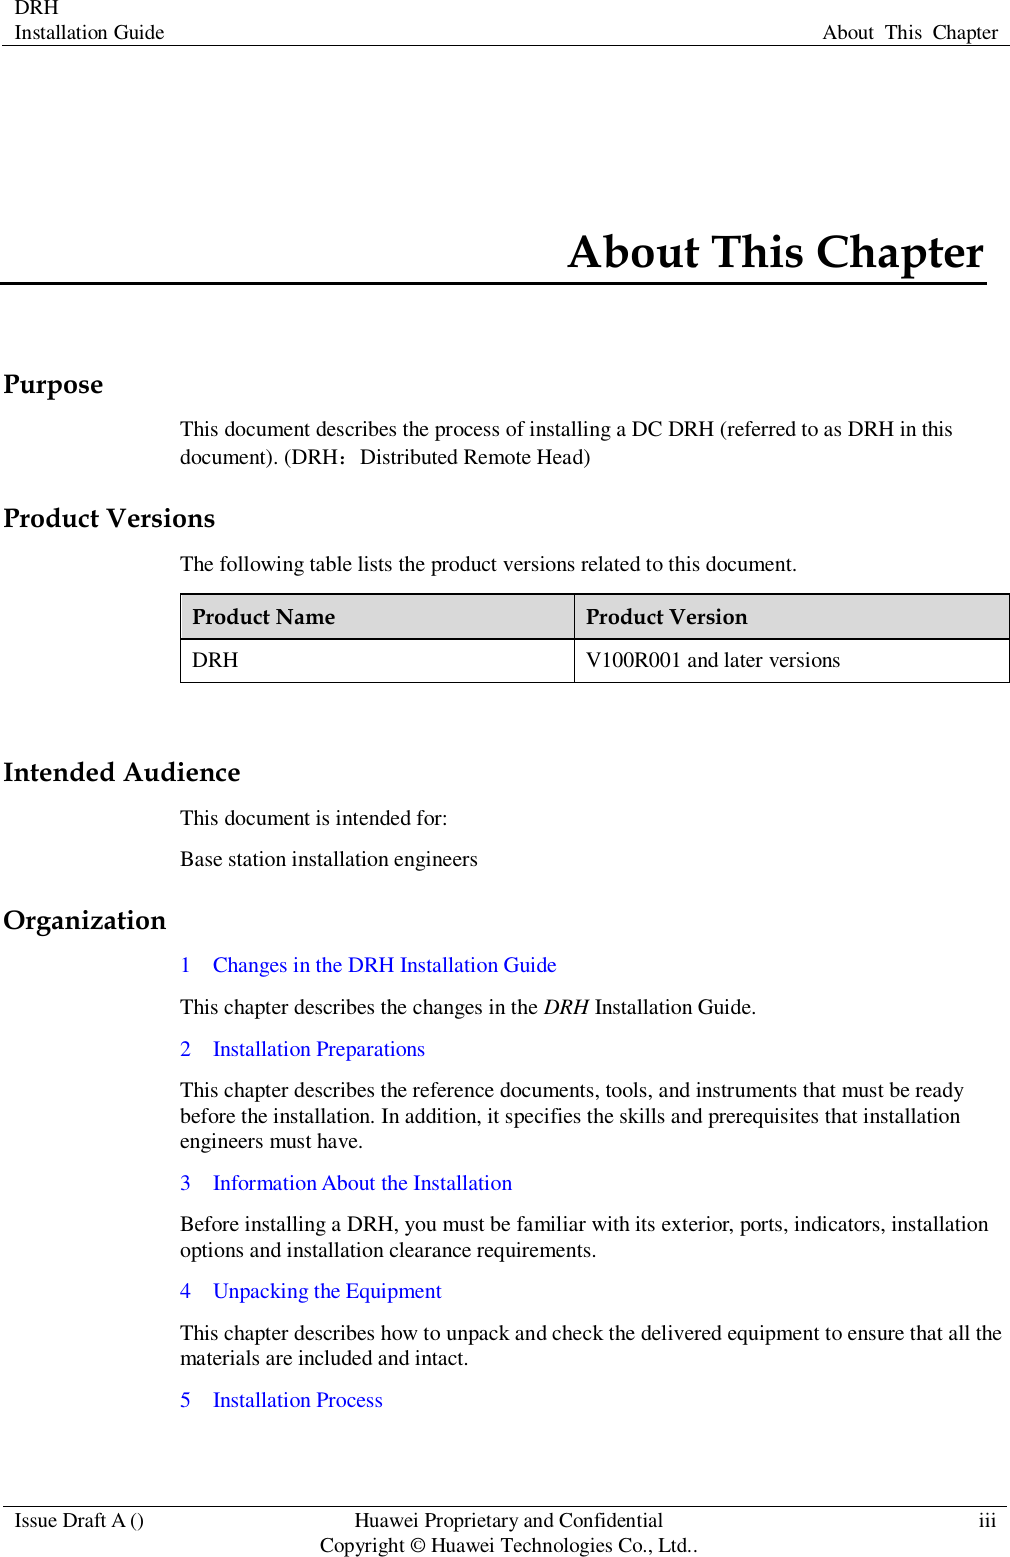 DRH   Installation Guide About  This  Chapter  Issue Draft A () Huawei Proprietary and Confidential                                     Copyright © Huawei Technologies Co., Ltd.. iii  About This Chapter Purpose This document describes the process of installing a DC DRH (referred to as DRH in this document). (DRH：Distributed Remote Head) Product Versions The following table lists the product versions related to this document. Product Name Product Version DRH V100R001 and later versions  Intended Audience This document is intended for: Base station installation engineers Organization 1    Changes in the DRH Installation Guide This chapter describes the changes in the DRH Installation Guide. 2    Installation Preparations This chapter describes the reference documents, tools, and instruments that must be ready before the installation. In addition, it specifies the skills and prerequisites that installation engineers must have. 3    Information About the Installation Before installing a DRH, you must be familiar with its exterior, ports, indicators, installation options and installation clearance requirements. 4    Unpacking the Equipment This chapter describes how to unpack and check the delivered equipment to ensure that all the materials are included and intact. 5    Installation Process 